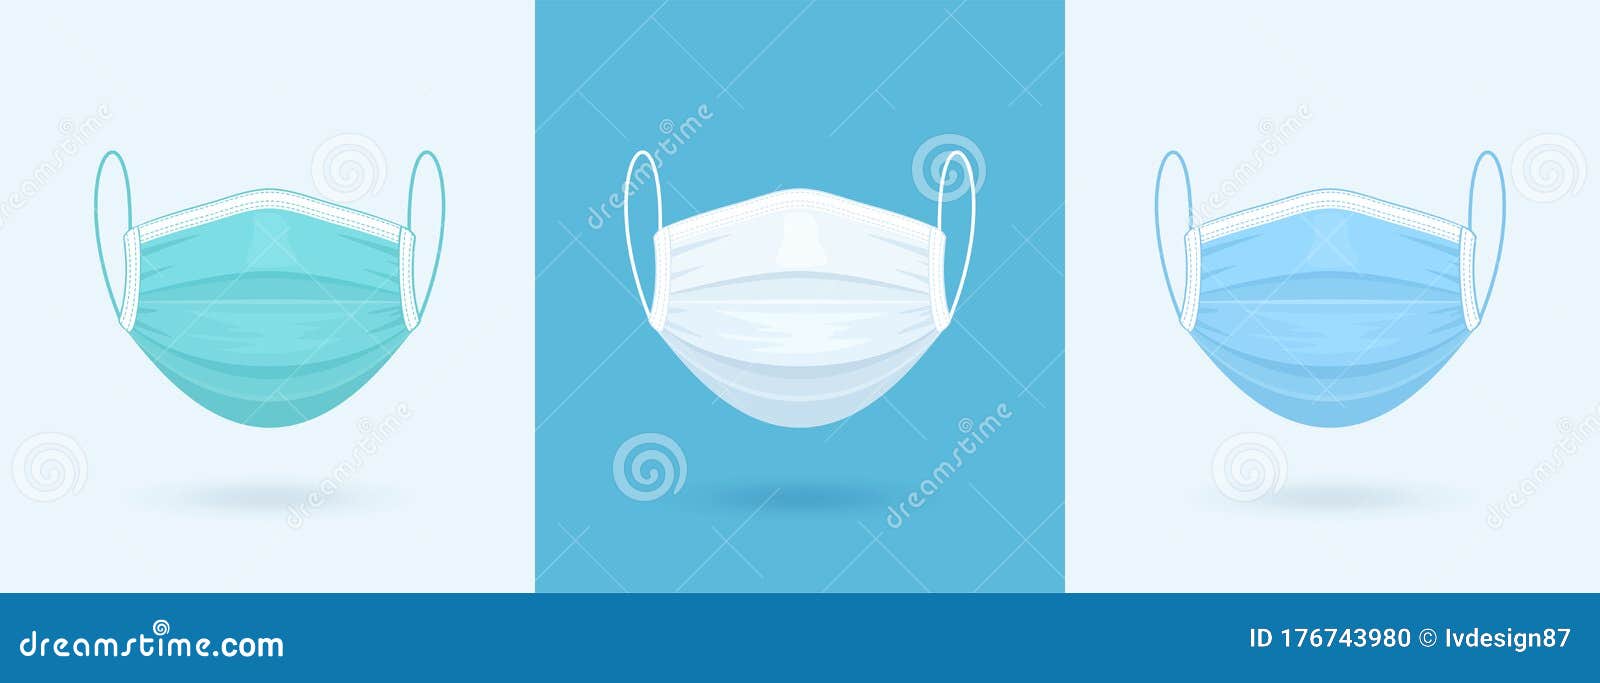 white, blue, green medical or surgical face mask. virus protection. breathing respirator mask. health care concept. 